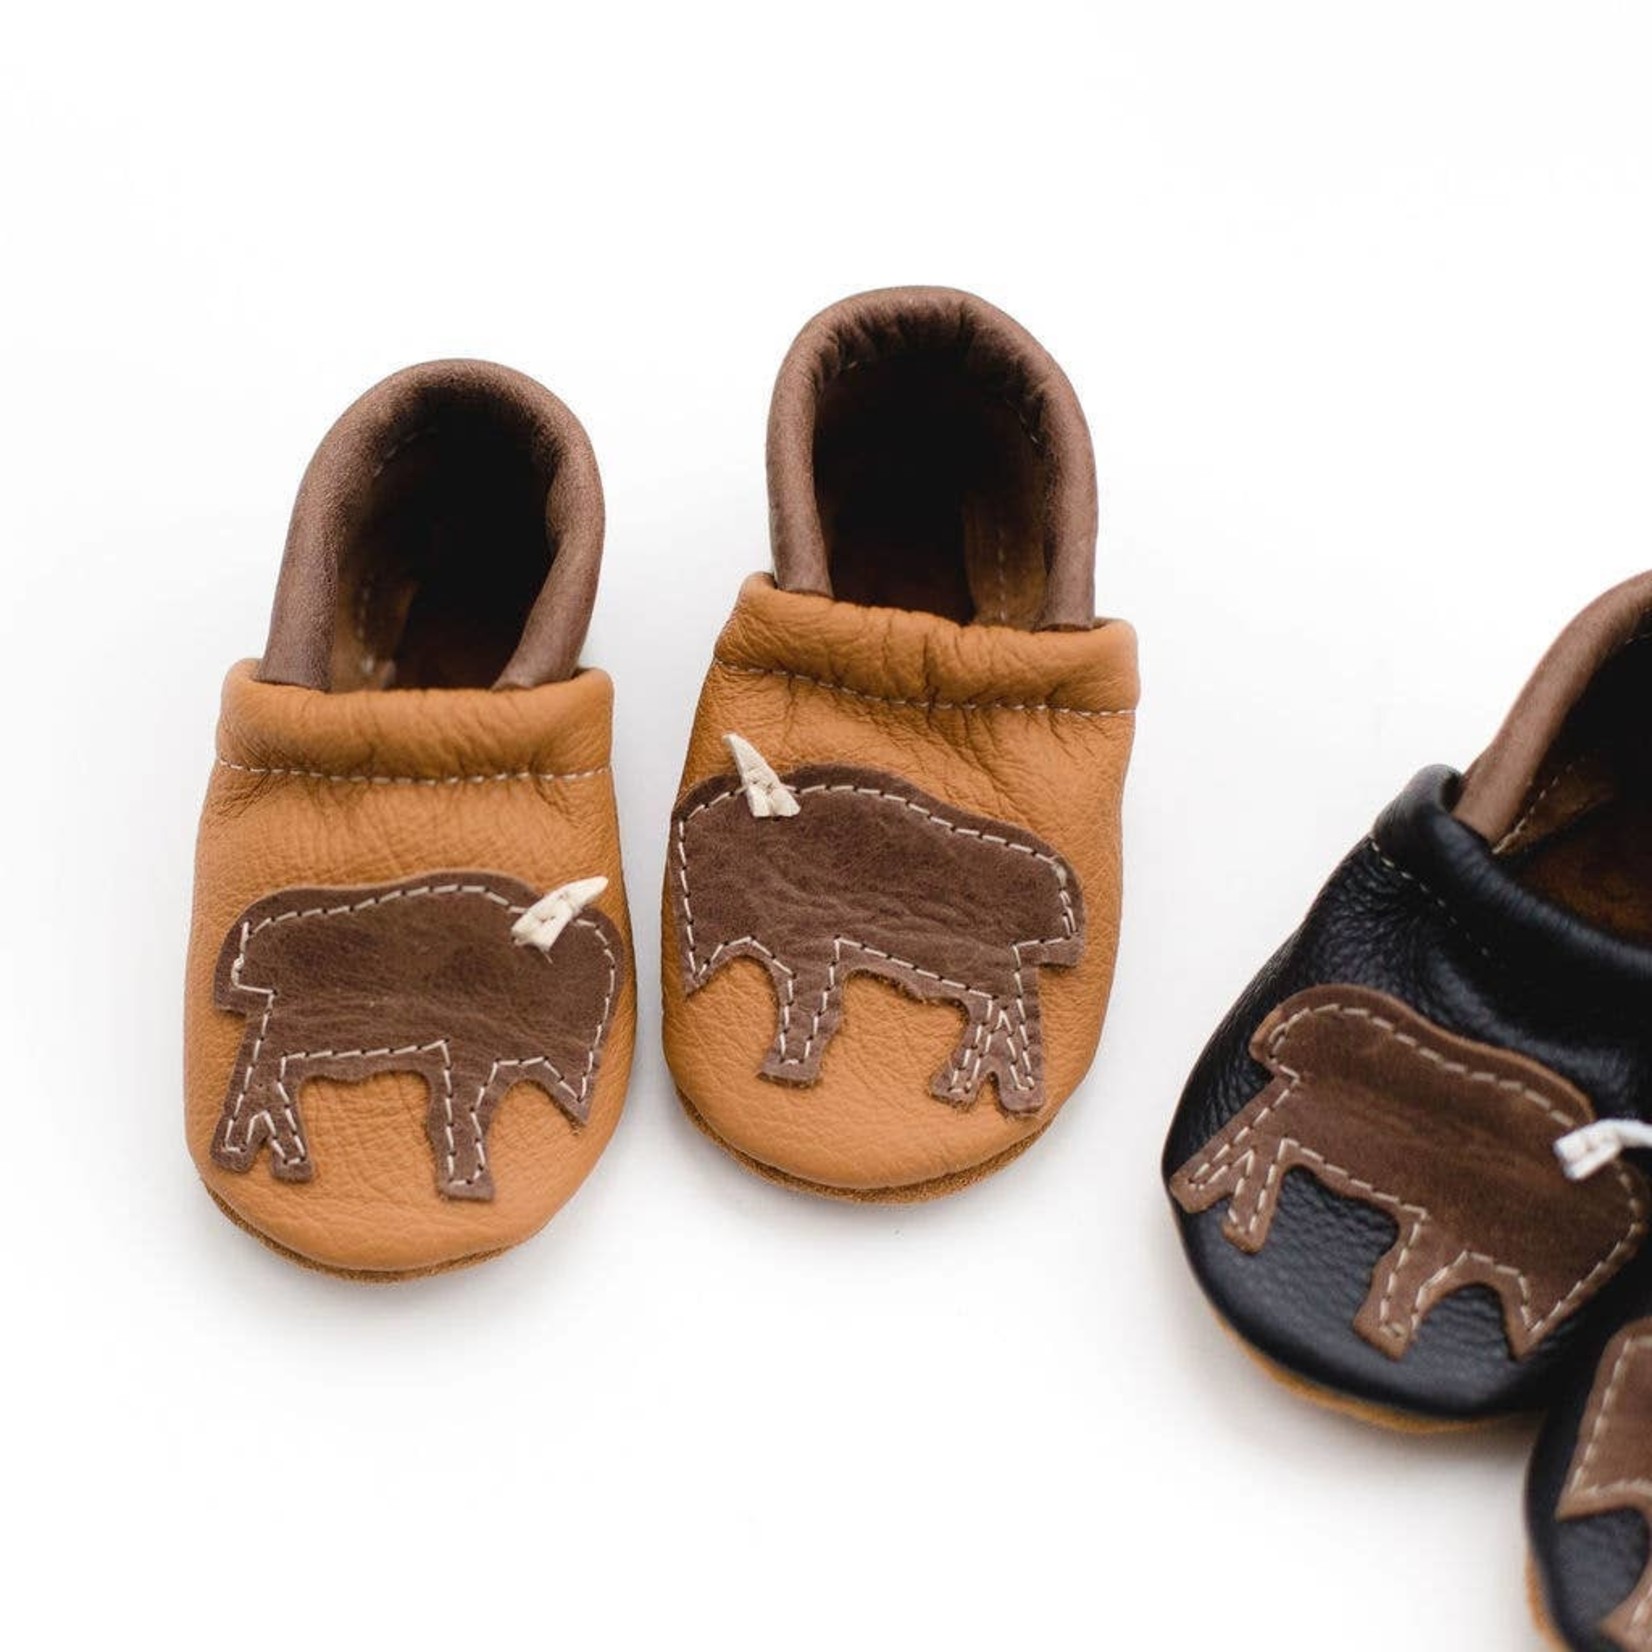 Starry Knight Design Bison on Tan Moccs Baby Shoes